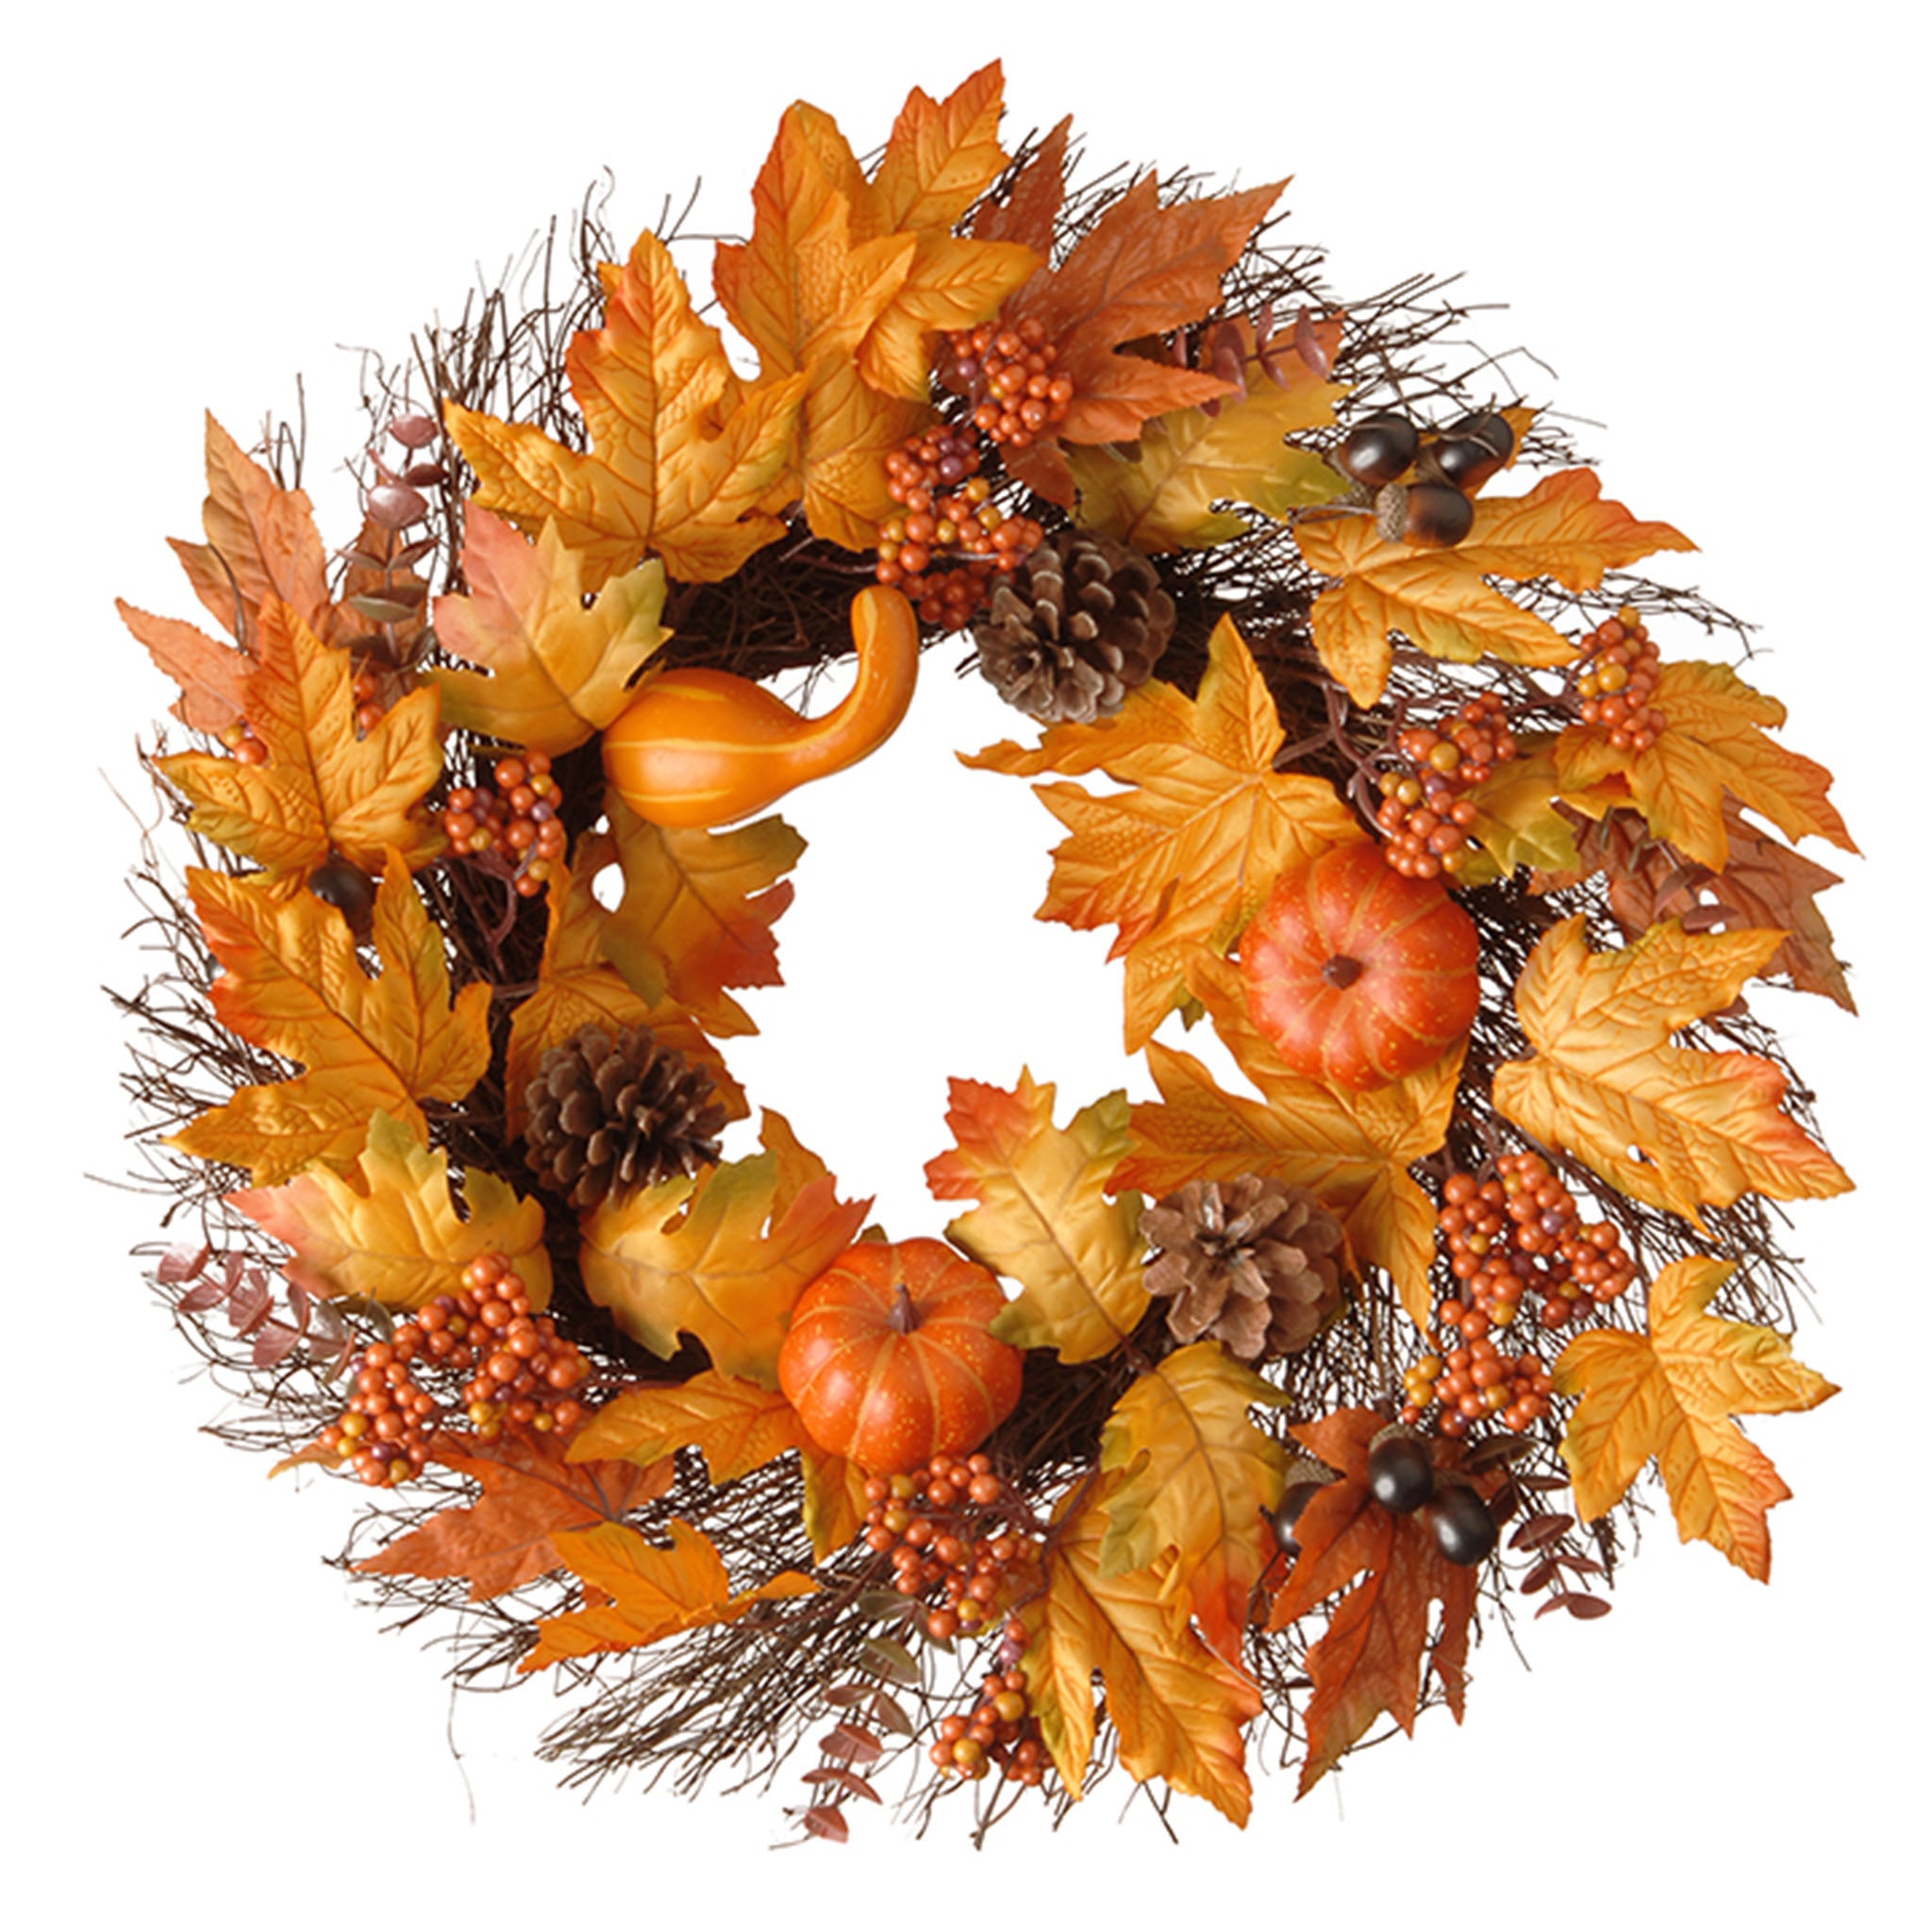 Artificial Autumn Wreath, Decorated with Gourds, Pumpkins, Berry Clusters, Acorns, Maple Leaves, Autumn Collection, 24 in